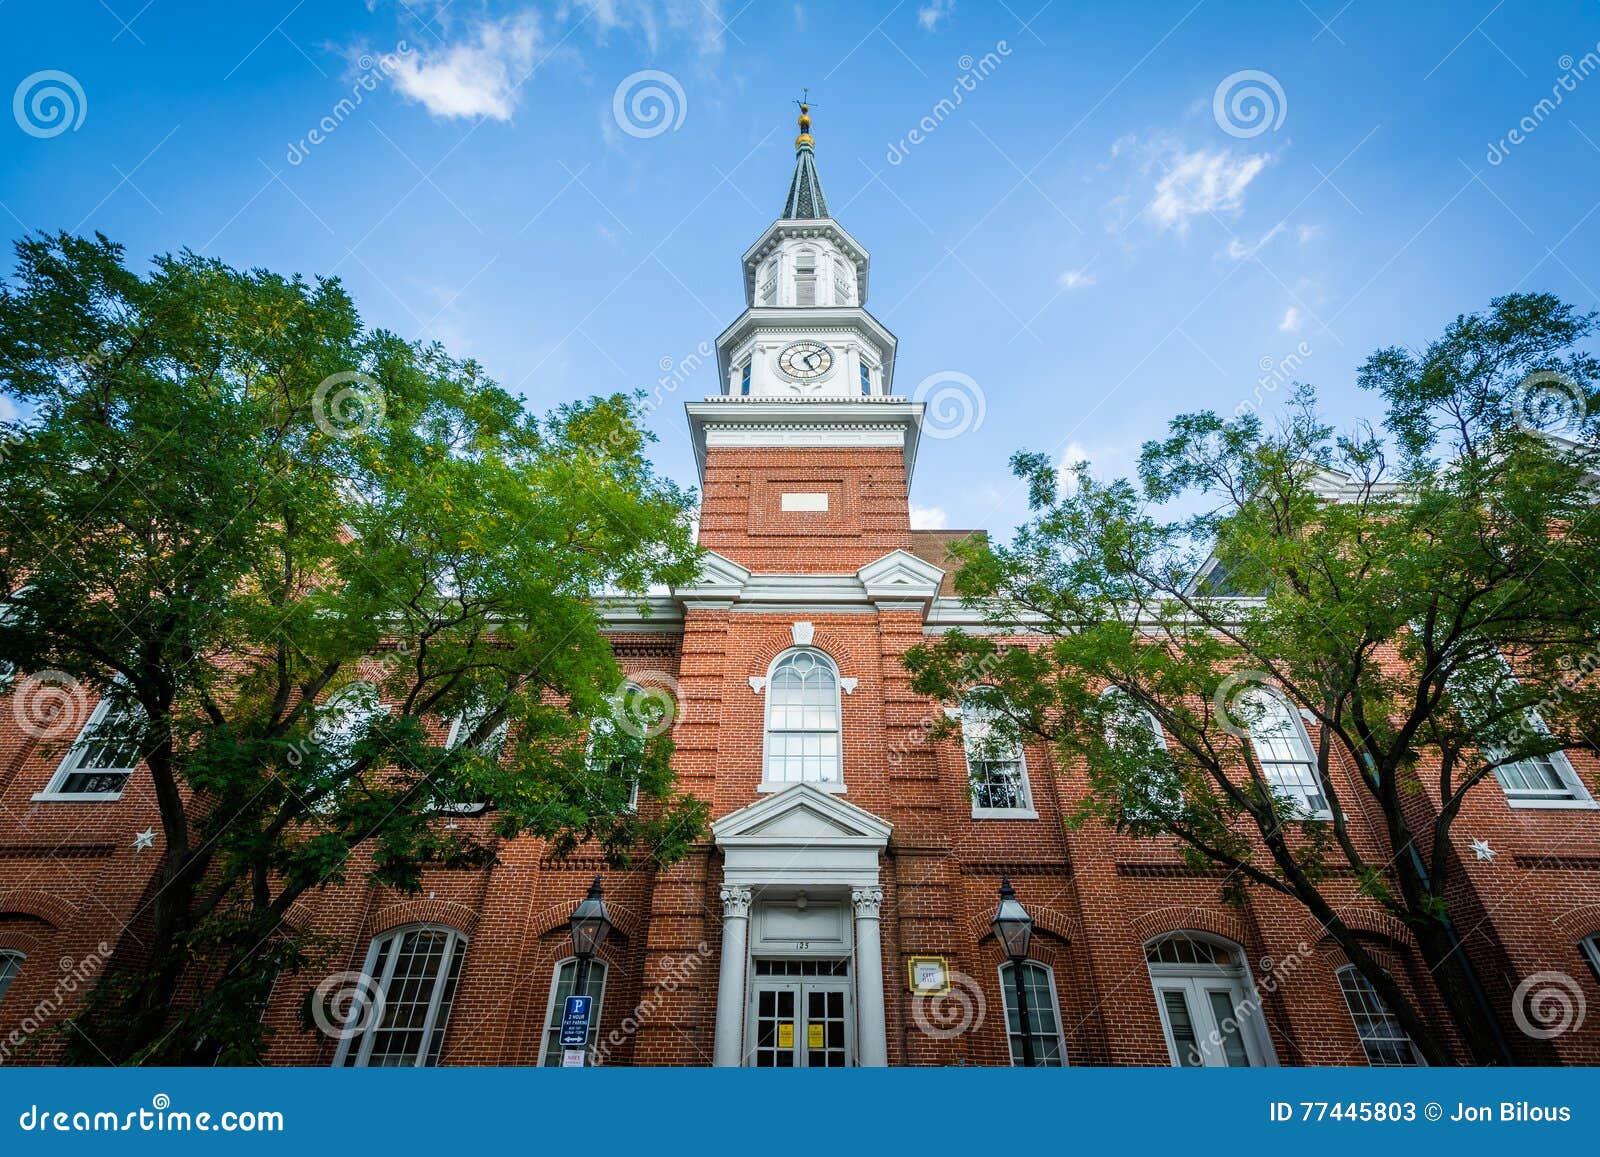 city hall, in the old town of alexandria, virginia.